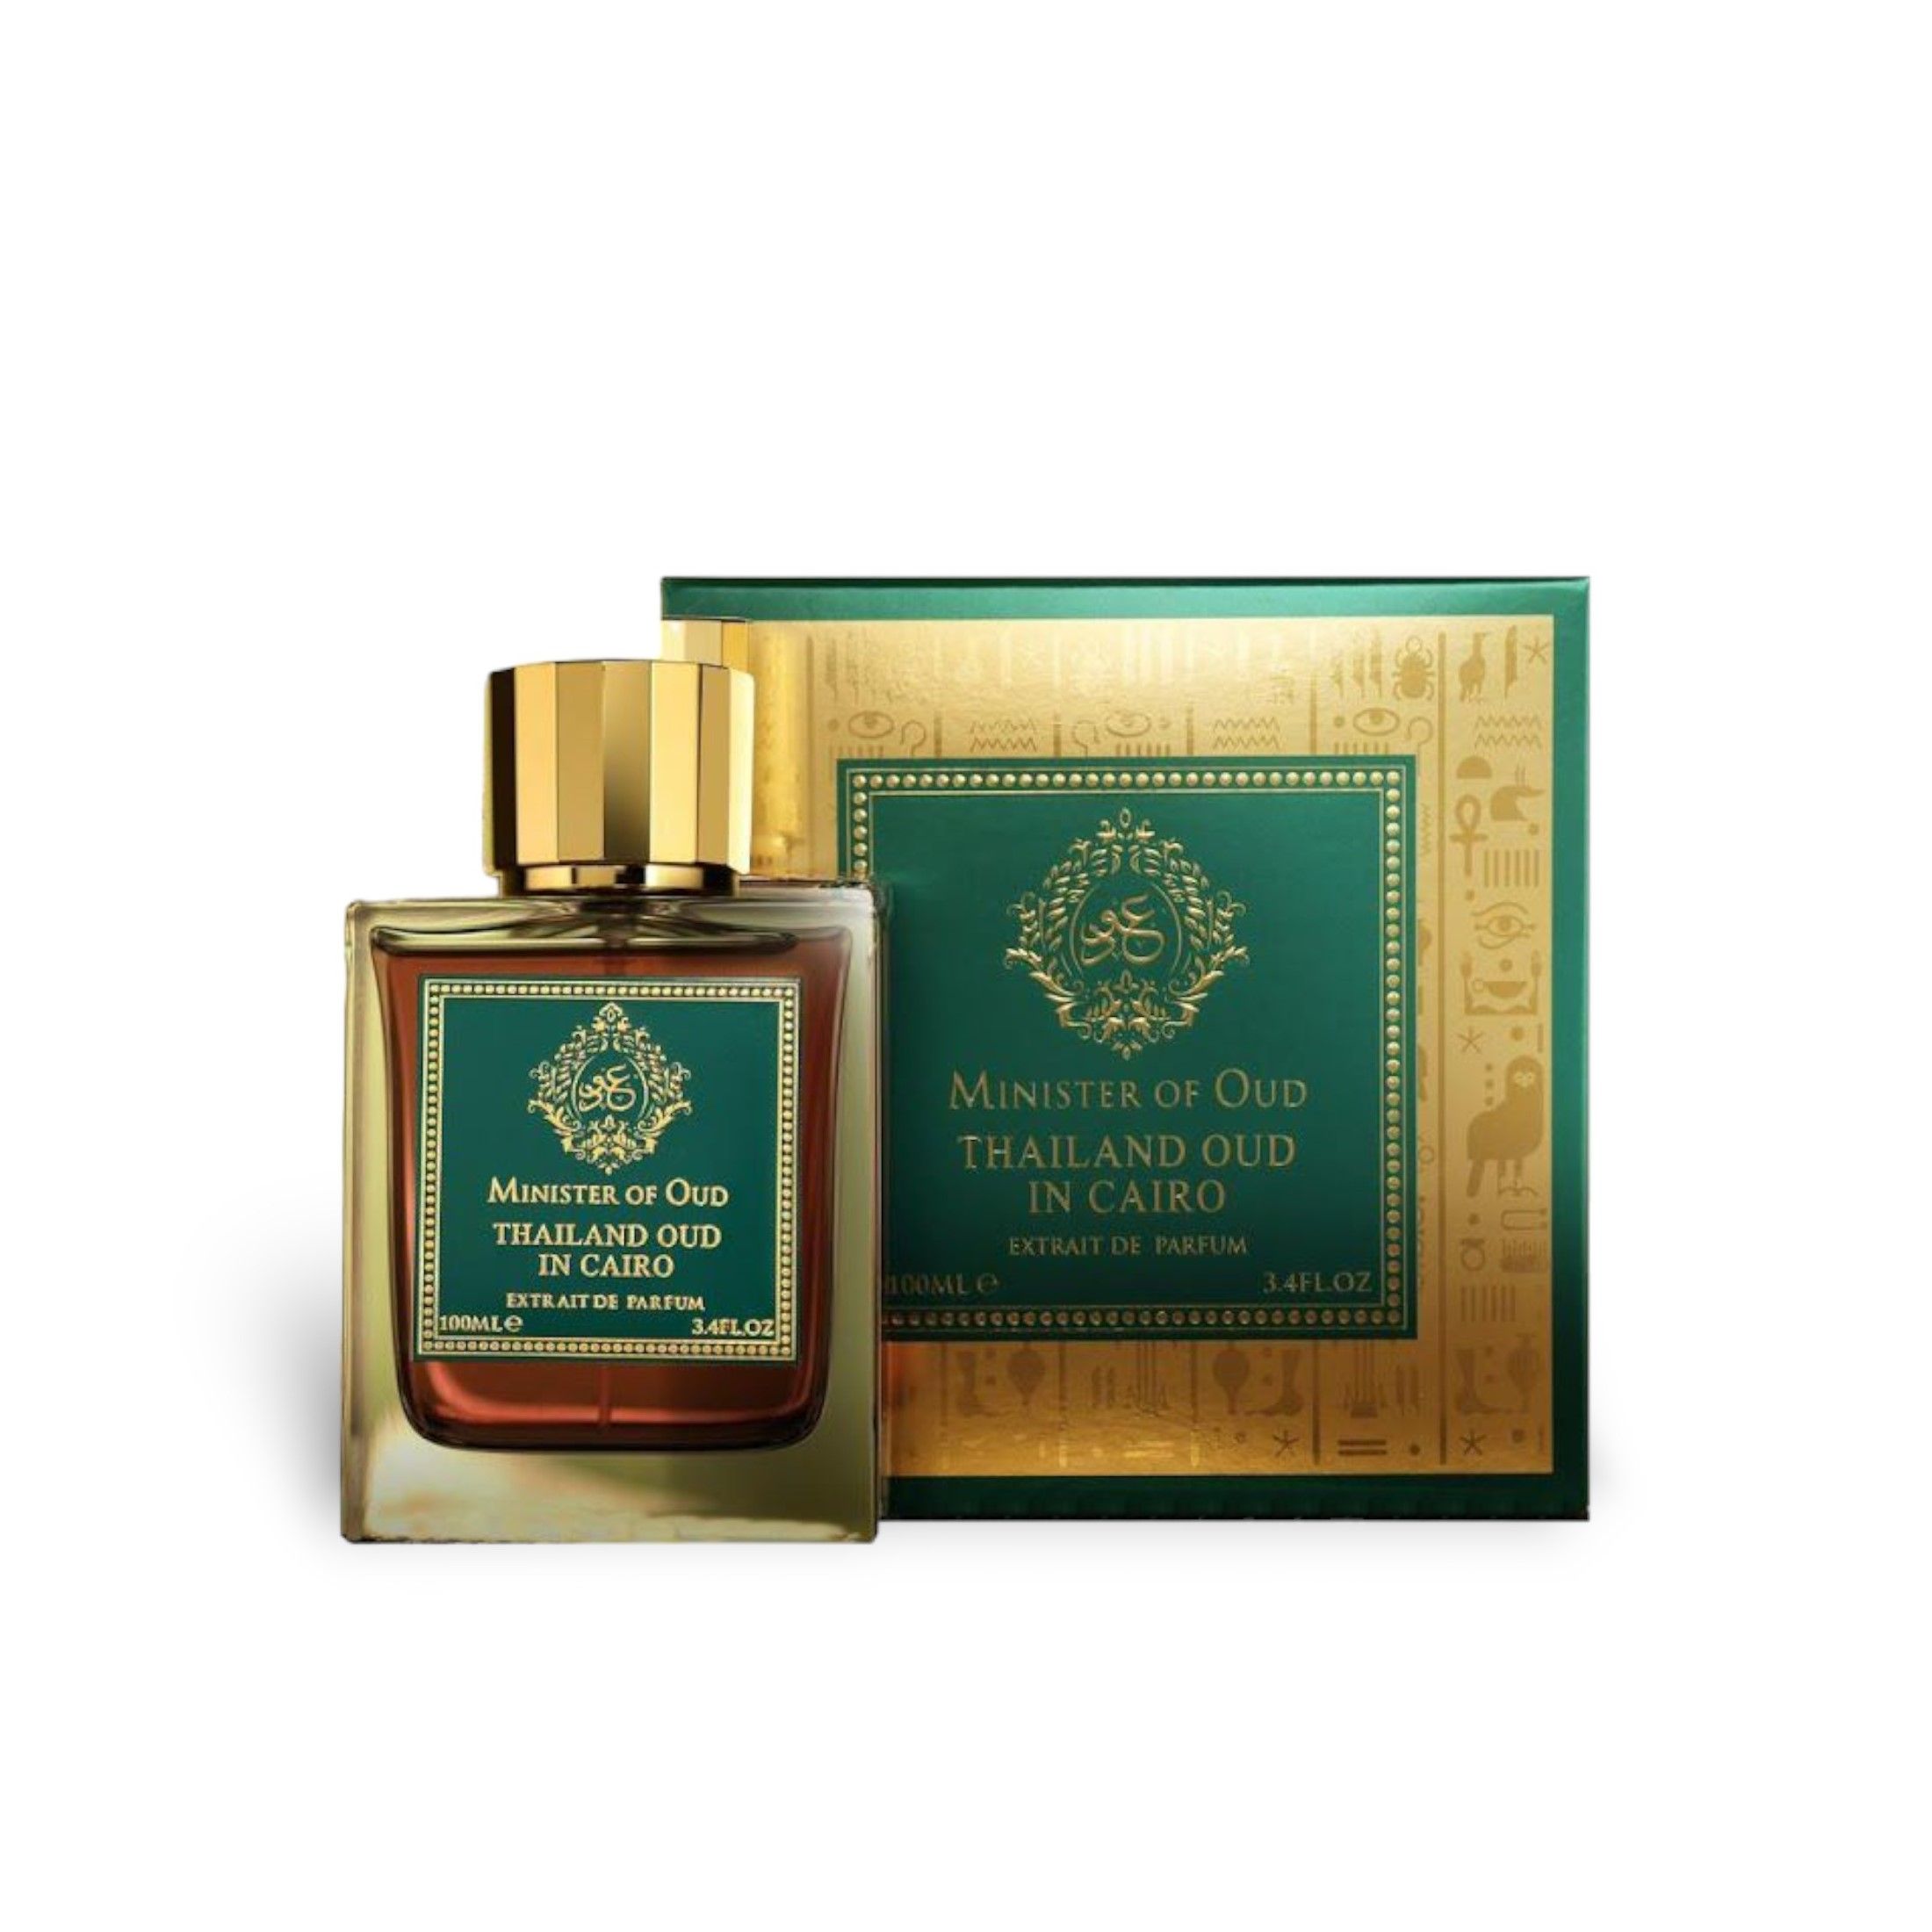 Minister Of Oud - Thailand Oud In Cairo Extrait De Parfum 100Ml By Fragrance World